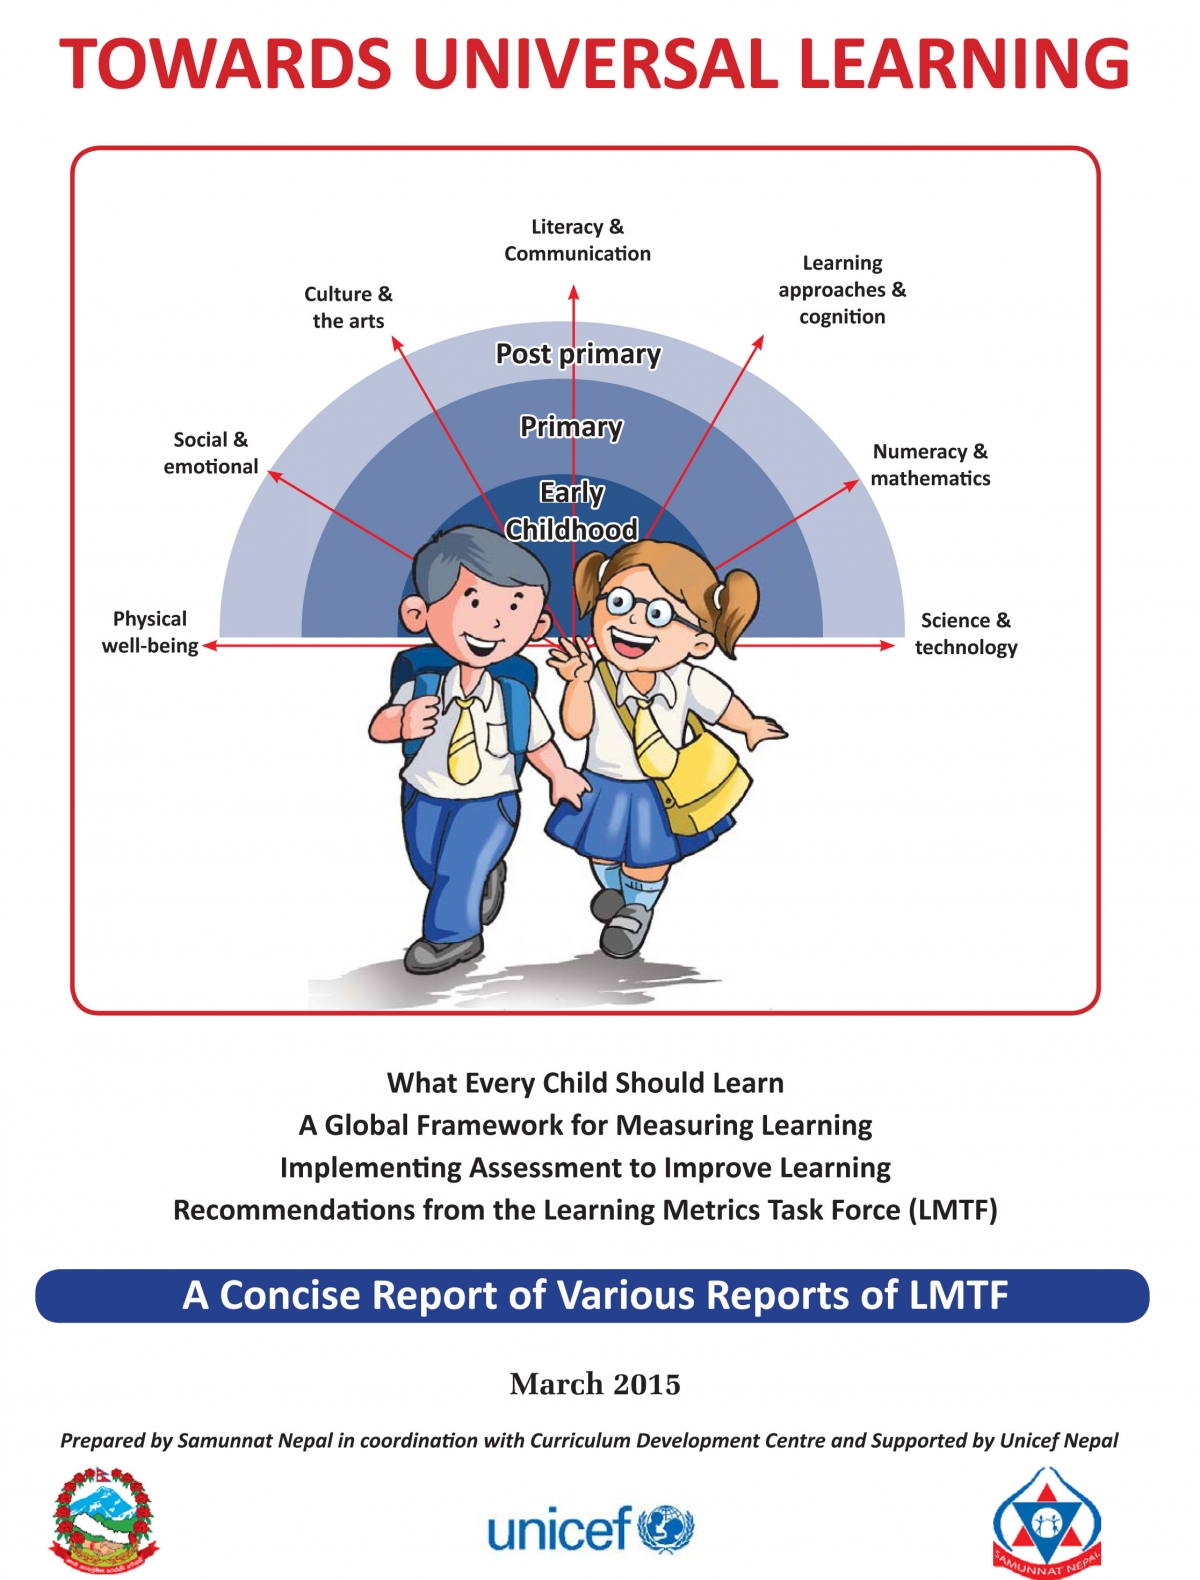 Dissemination on Learning Metrics Task Force (LMTF) Report